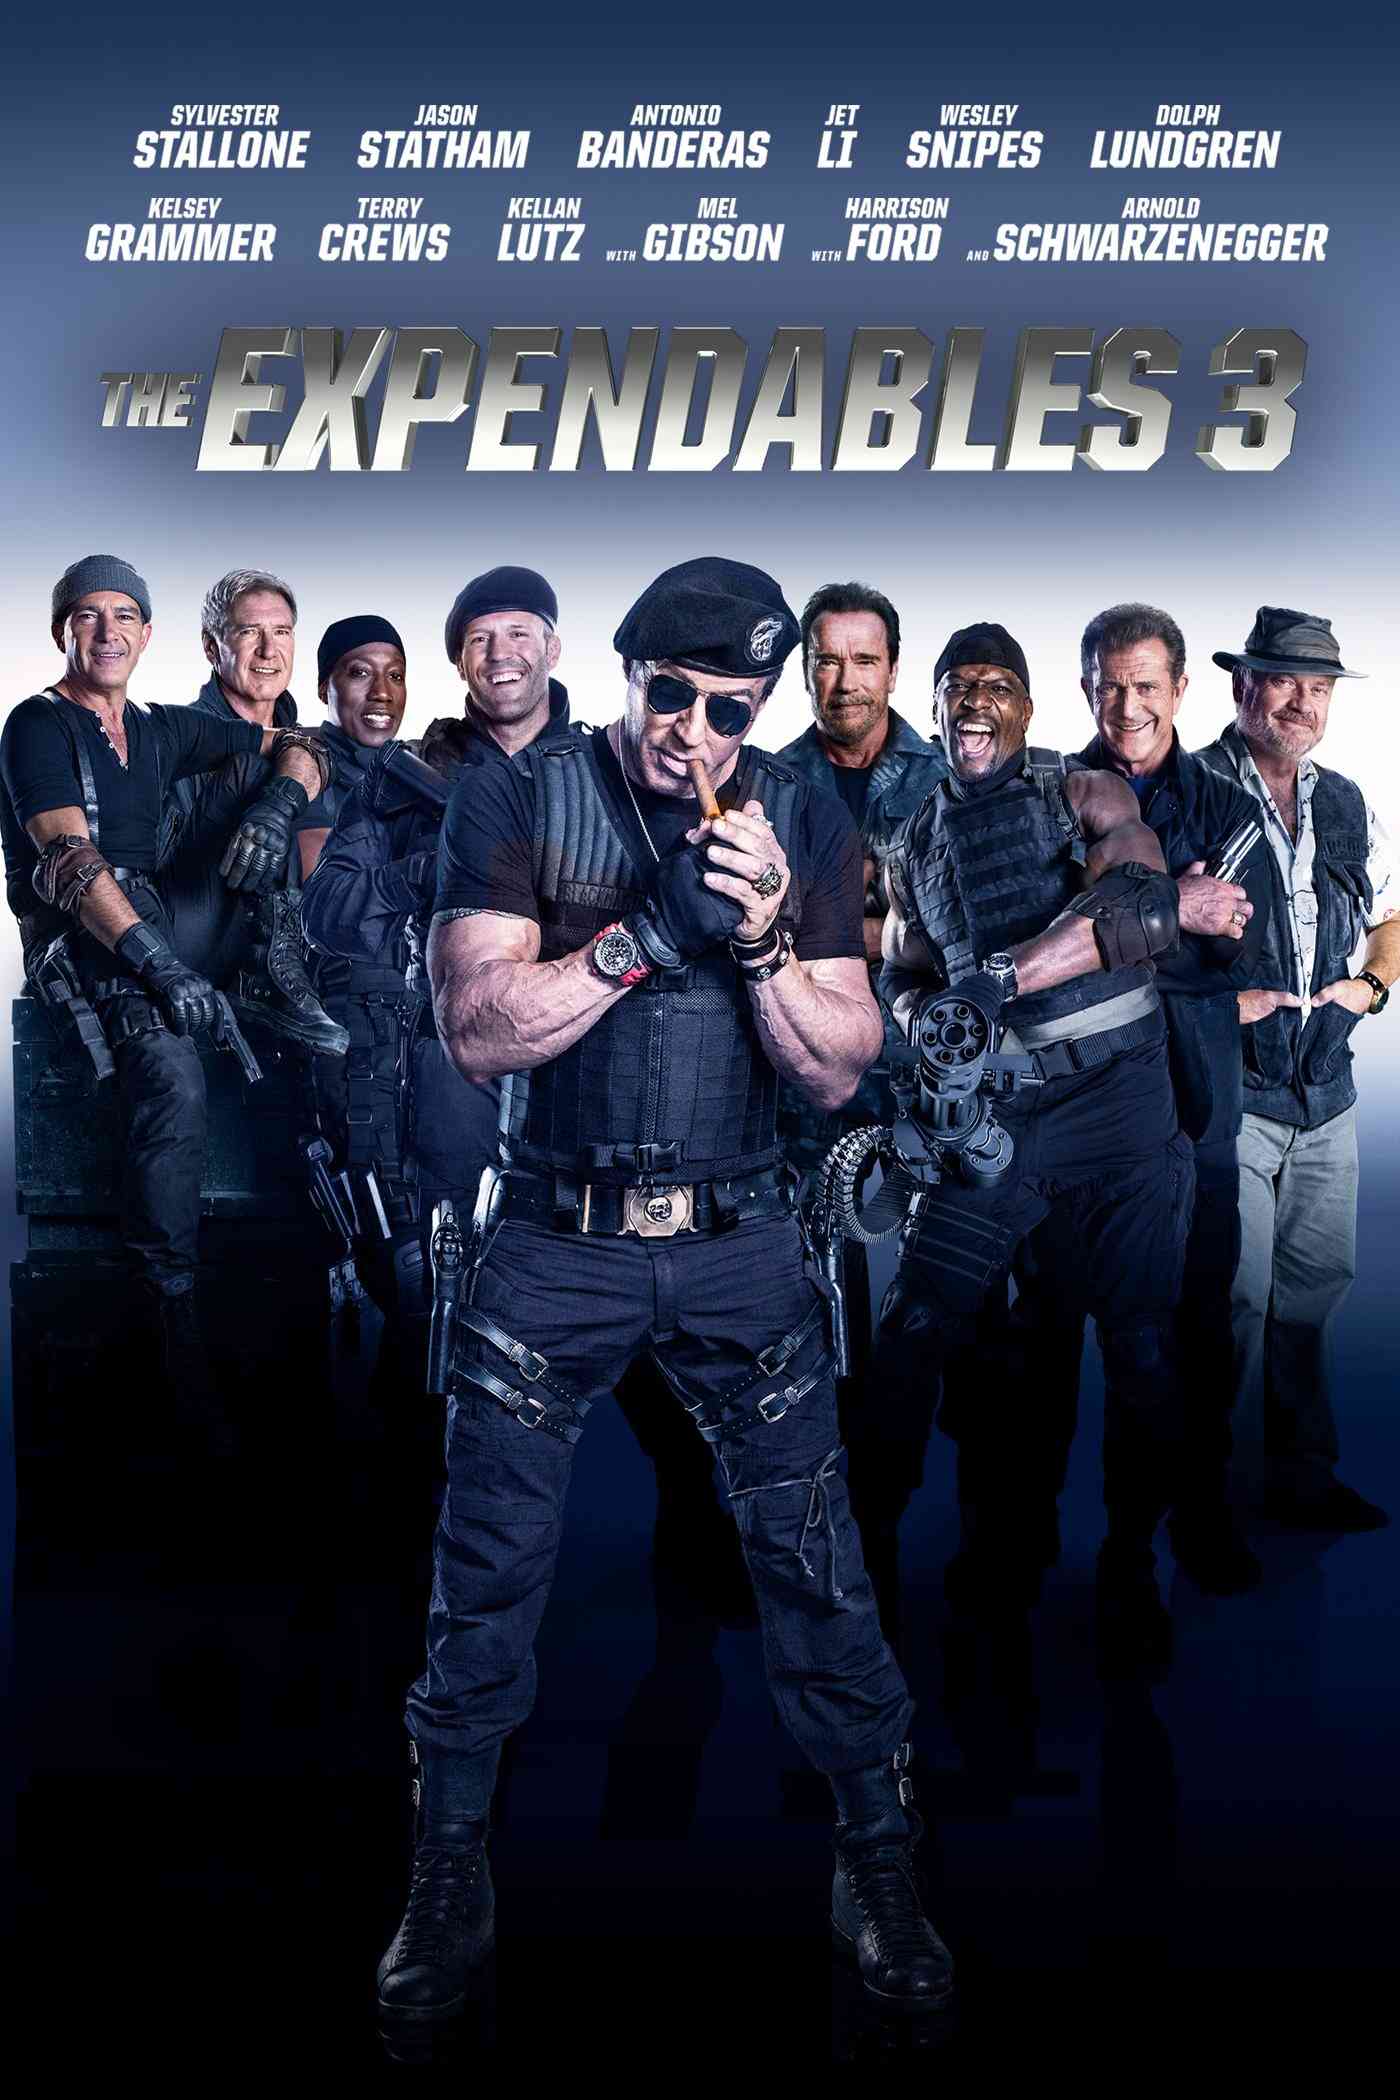 FULL MOVIE: The Expendables 3 (2014) [Action]